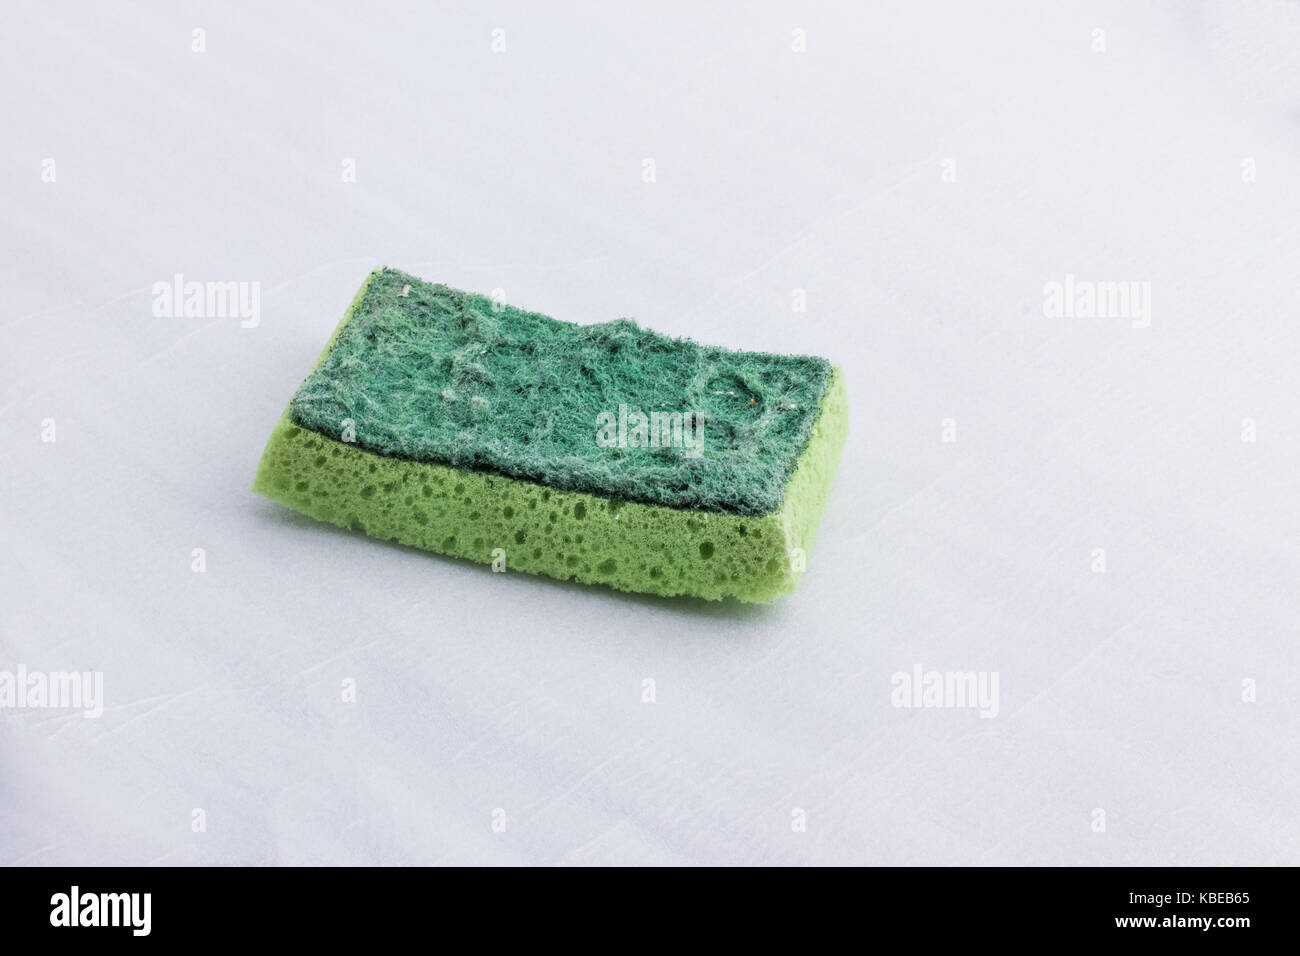 A green used kitchen sponge, with a hard and a soft surface, on a white background. Stock Photo